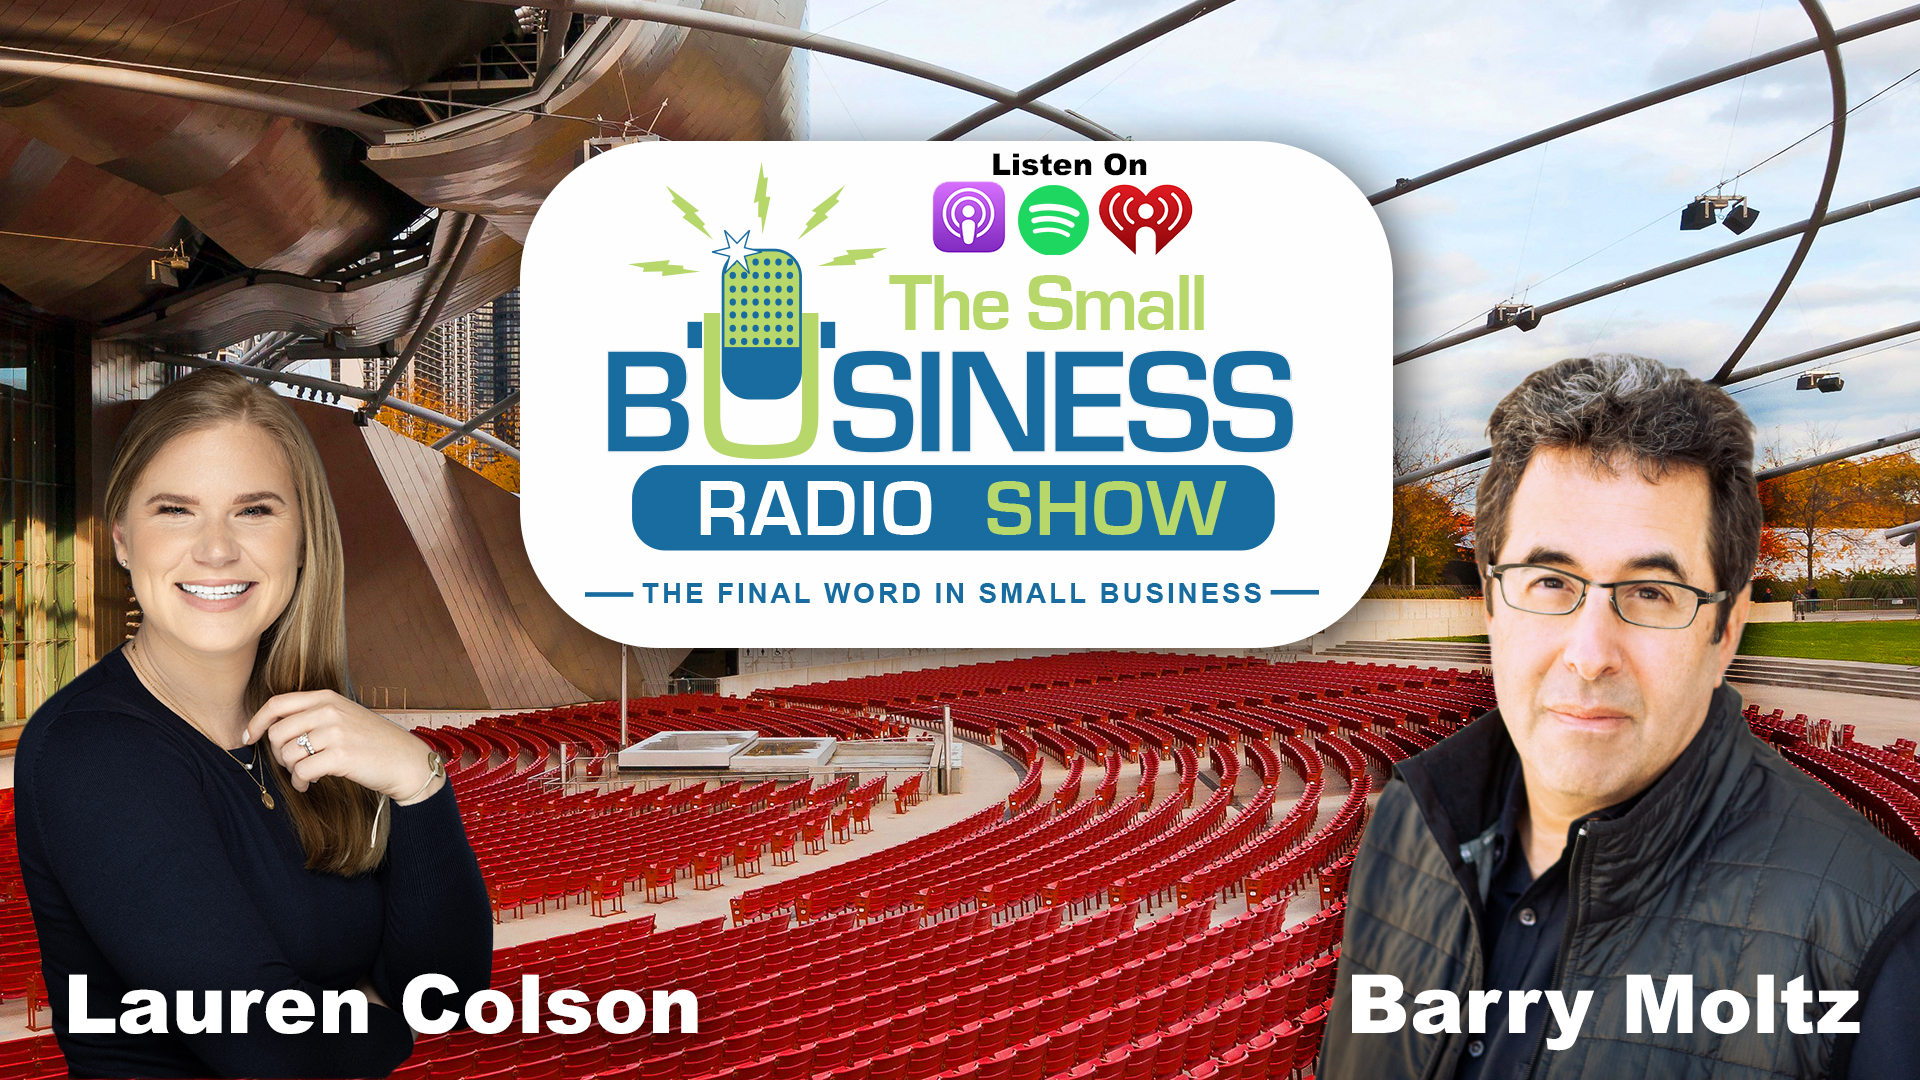 Lauren Colson on The Small Business Radio Show